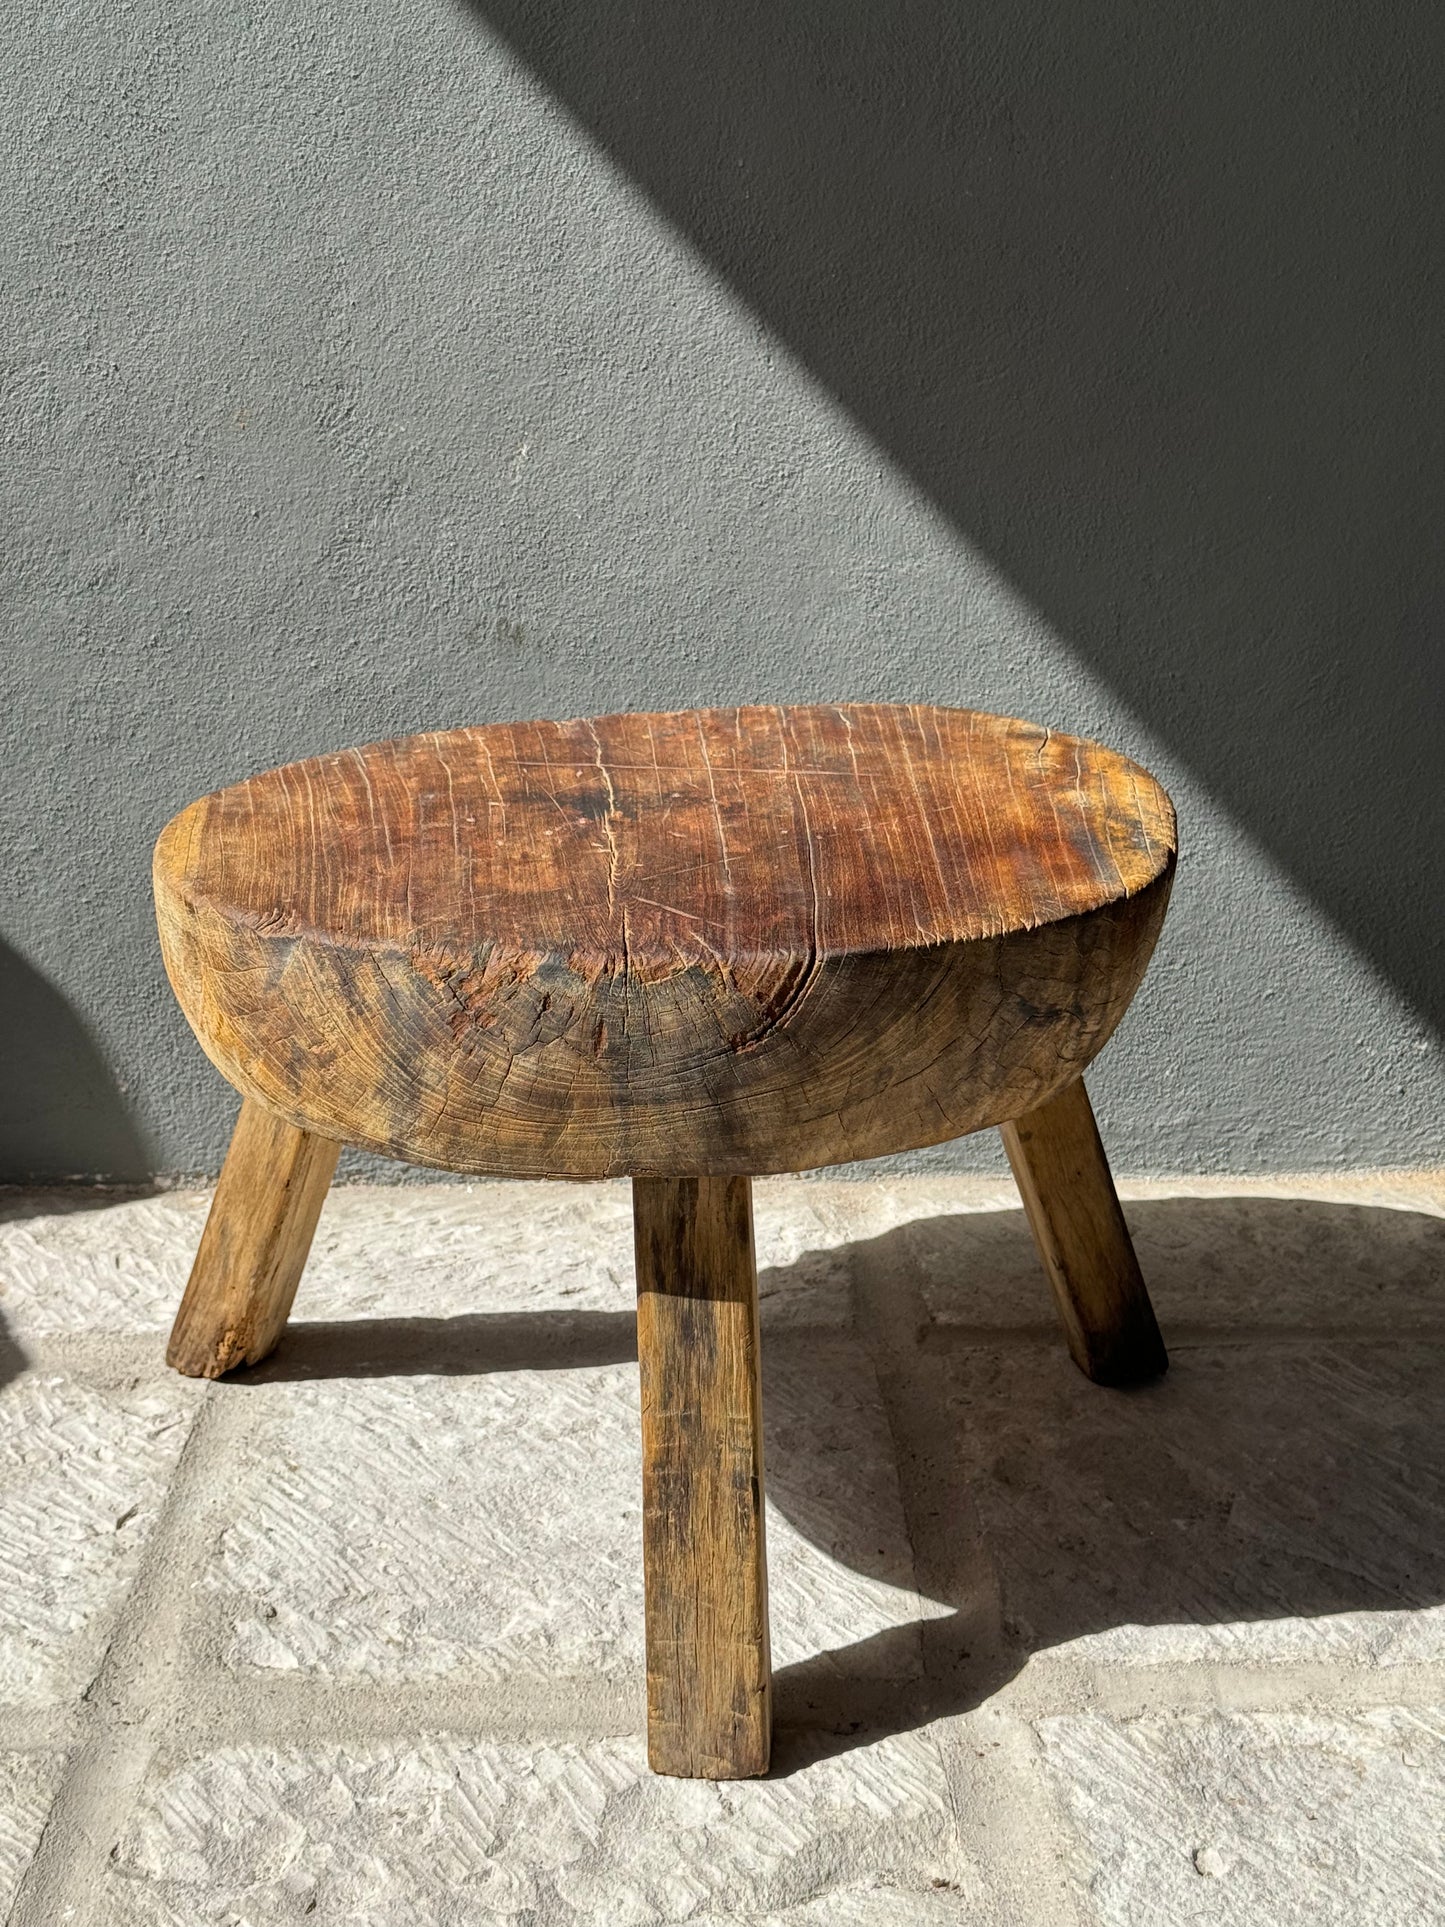 Primitive Hardwood Round Table From Yucatan